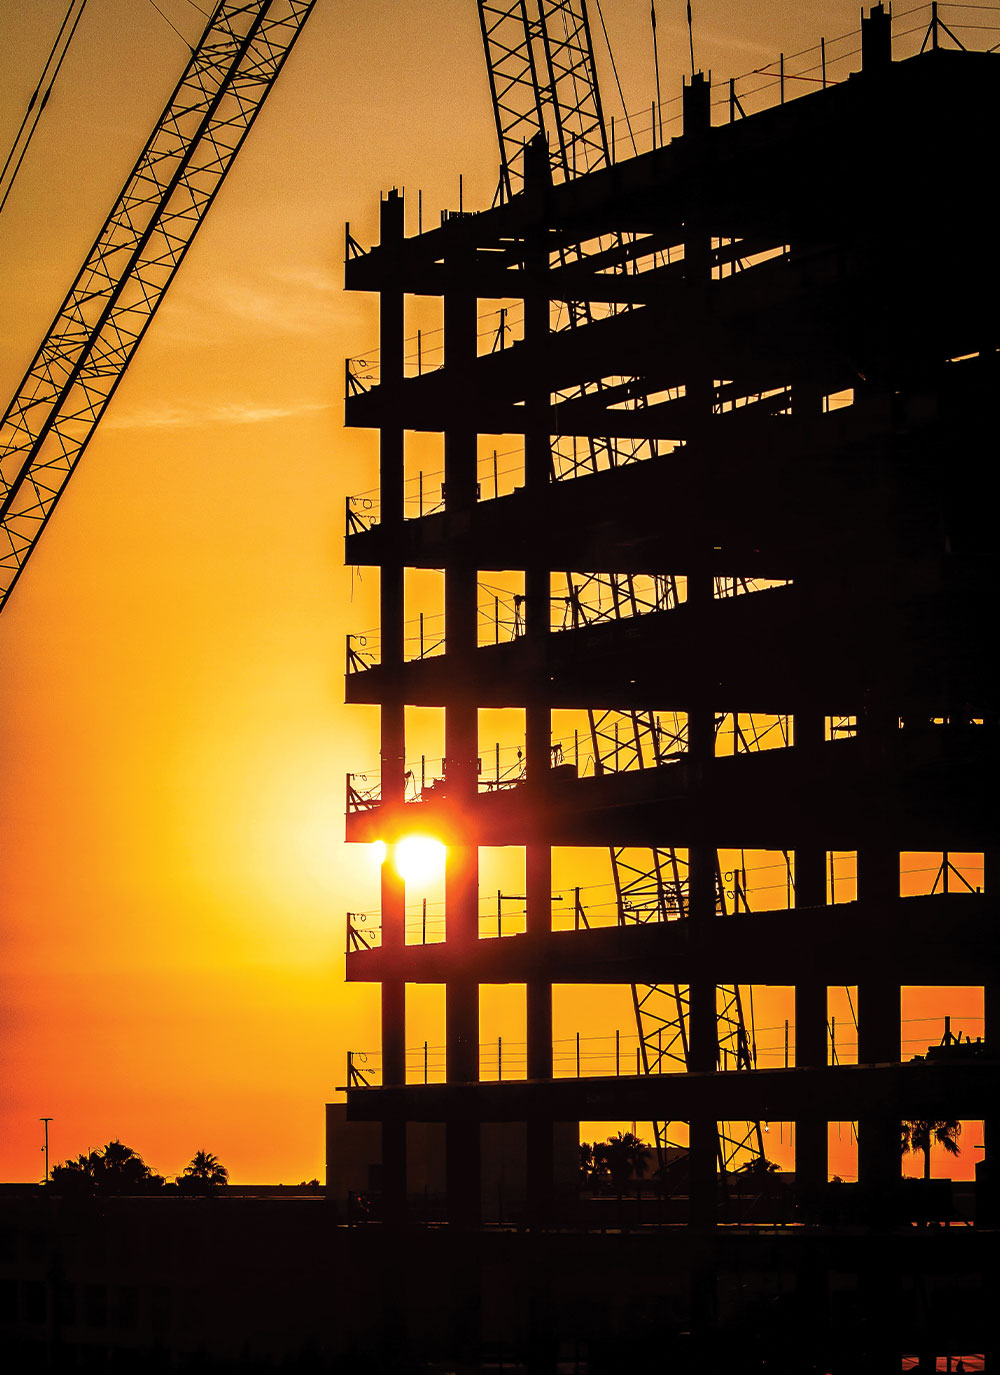 A silhouette of a building under construction at sunset.